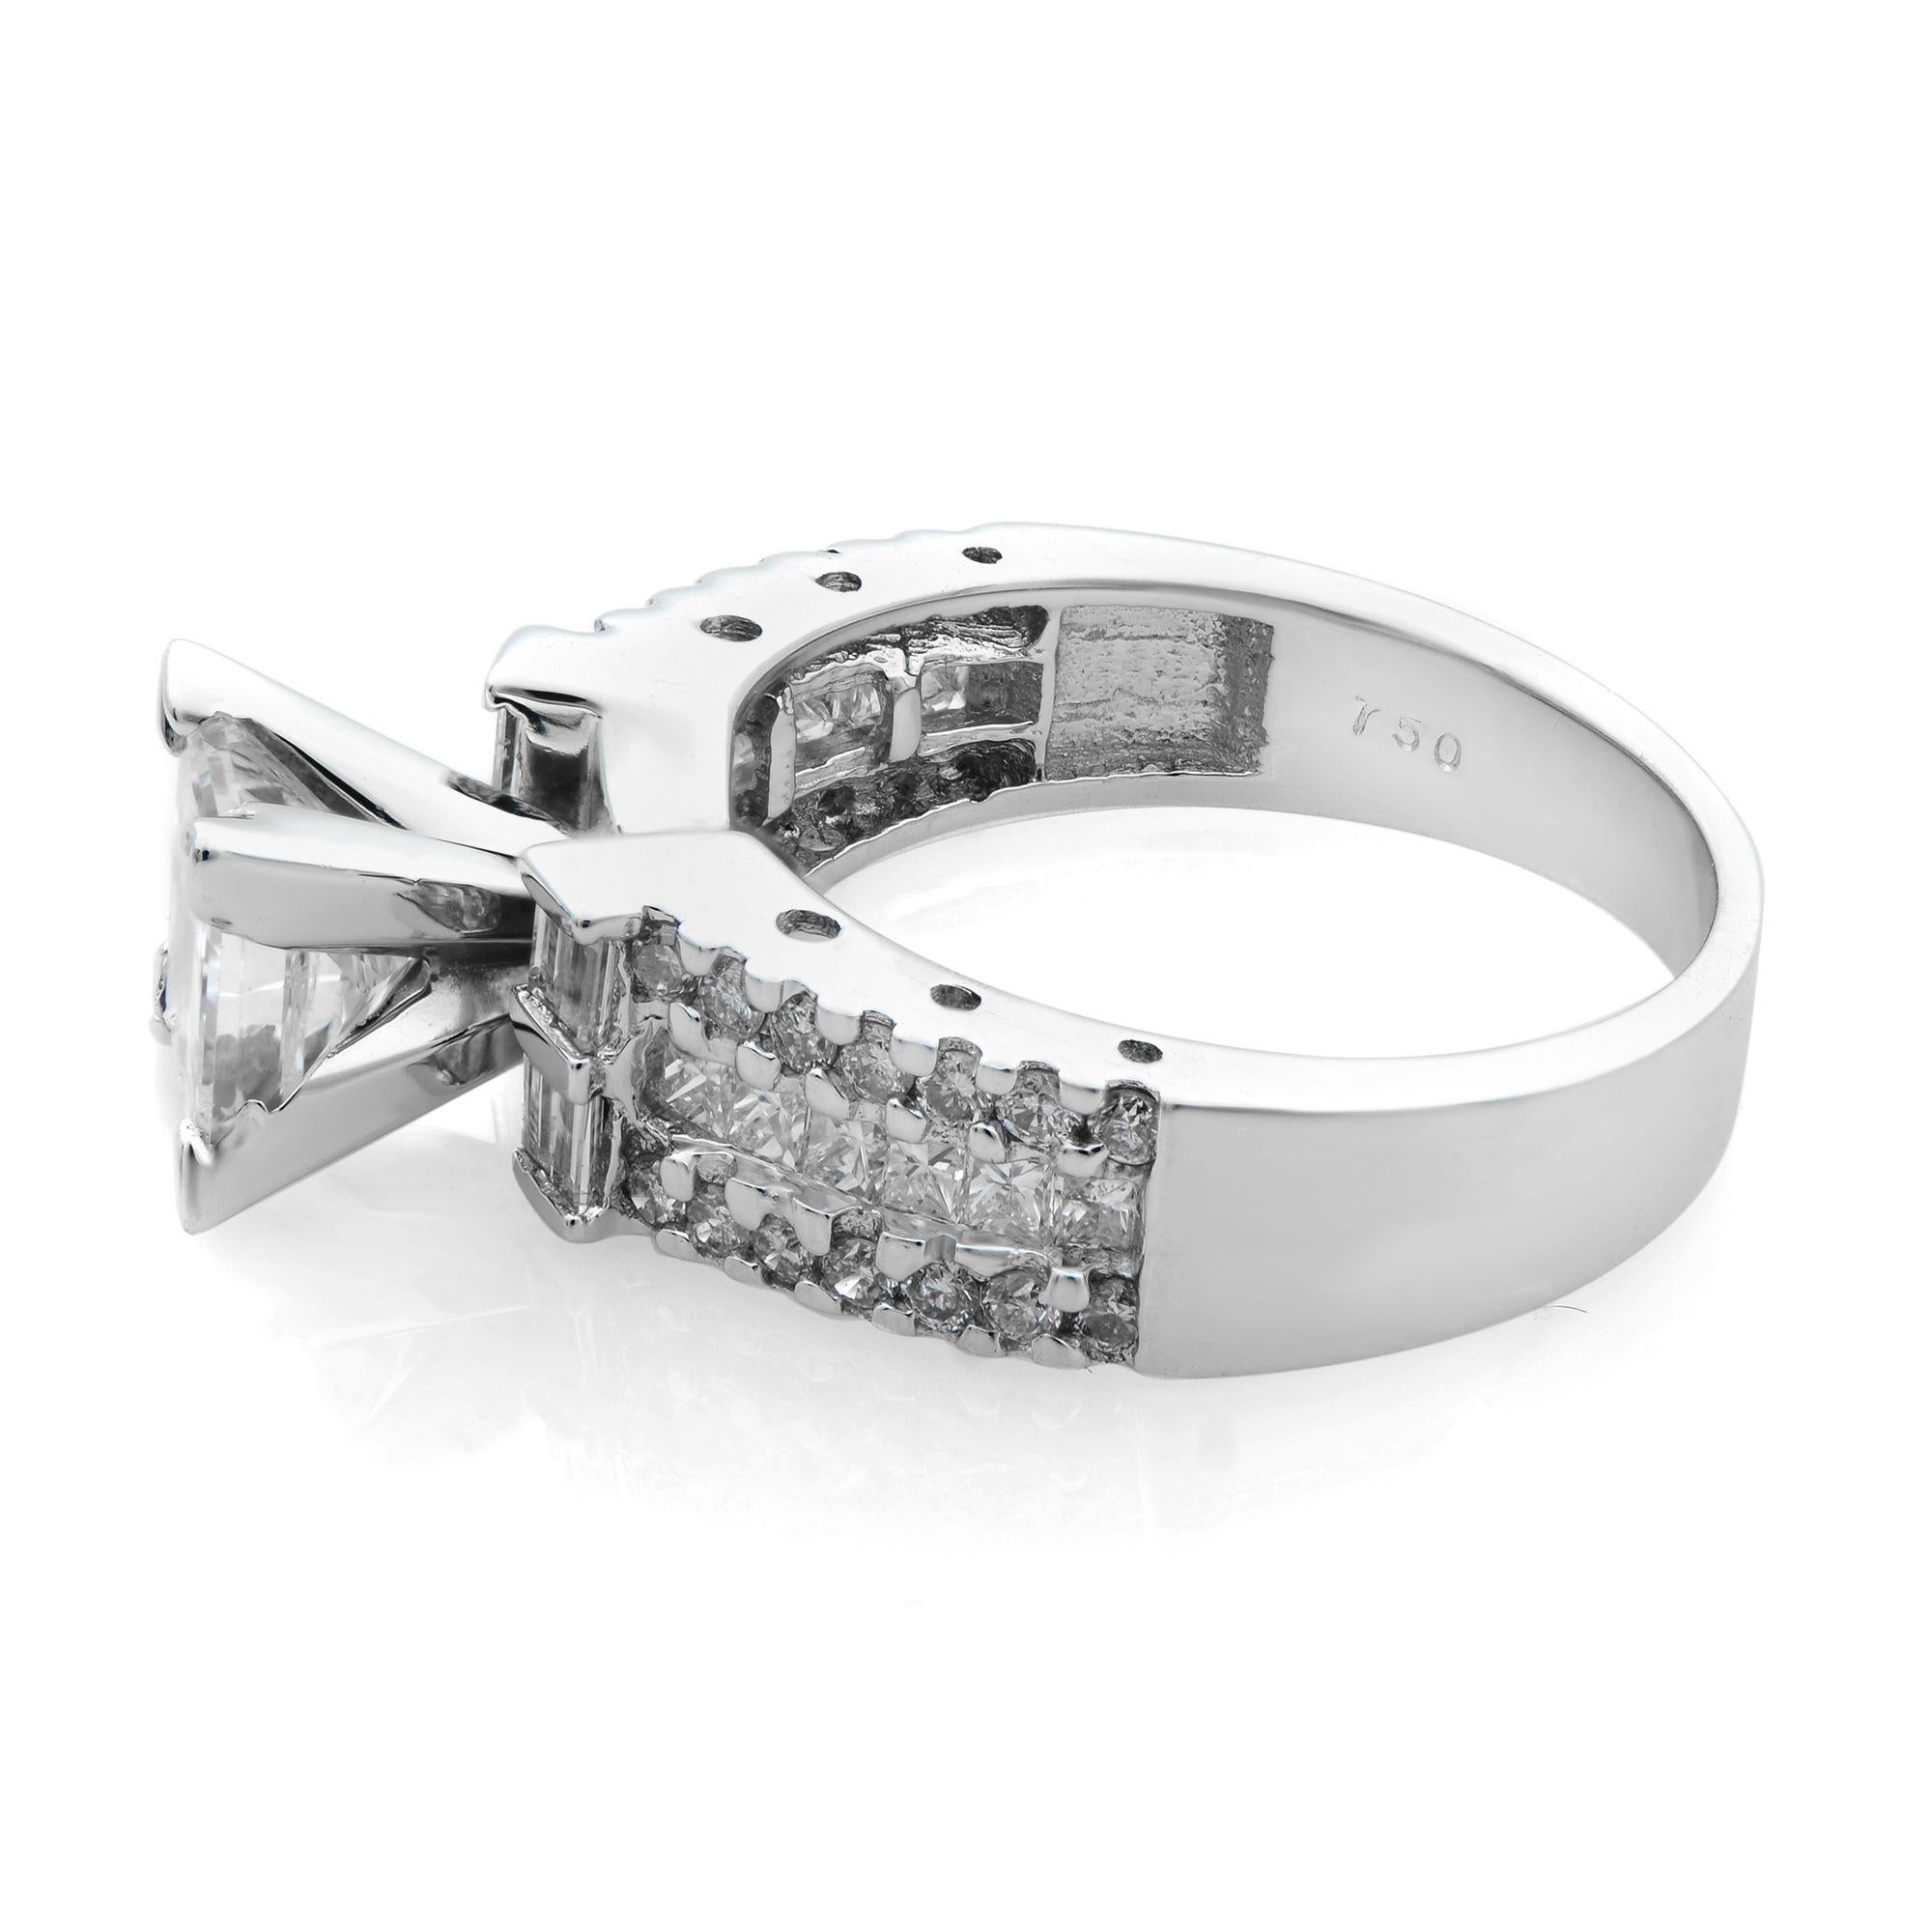 This amazing engagement ring is set in 18 karat white gold and features 1.25 carat princess cut as a center stone with round, baguette and princess cuts on a shank. The total diamond weight is approximately 2.20 carats. Diamonds are SI2 clarity and